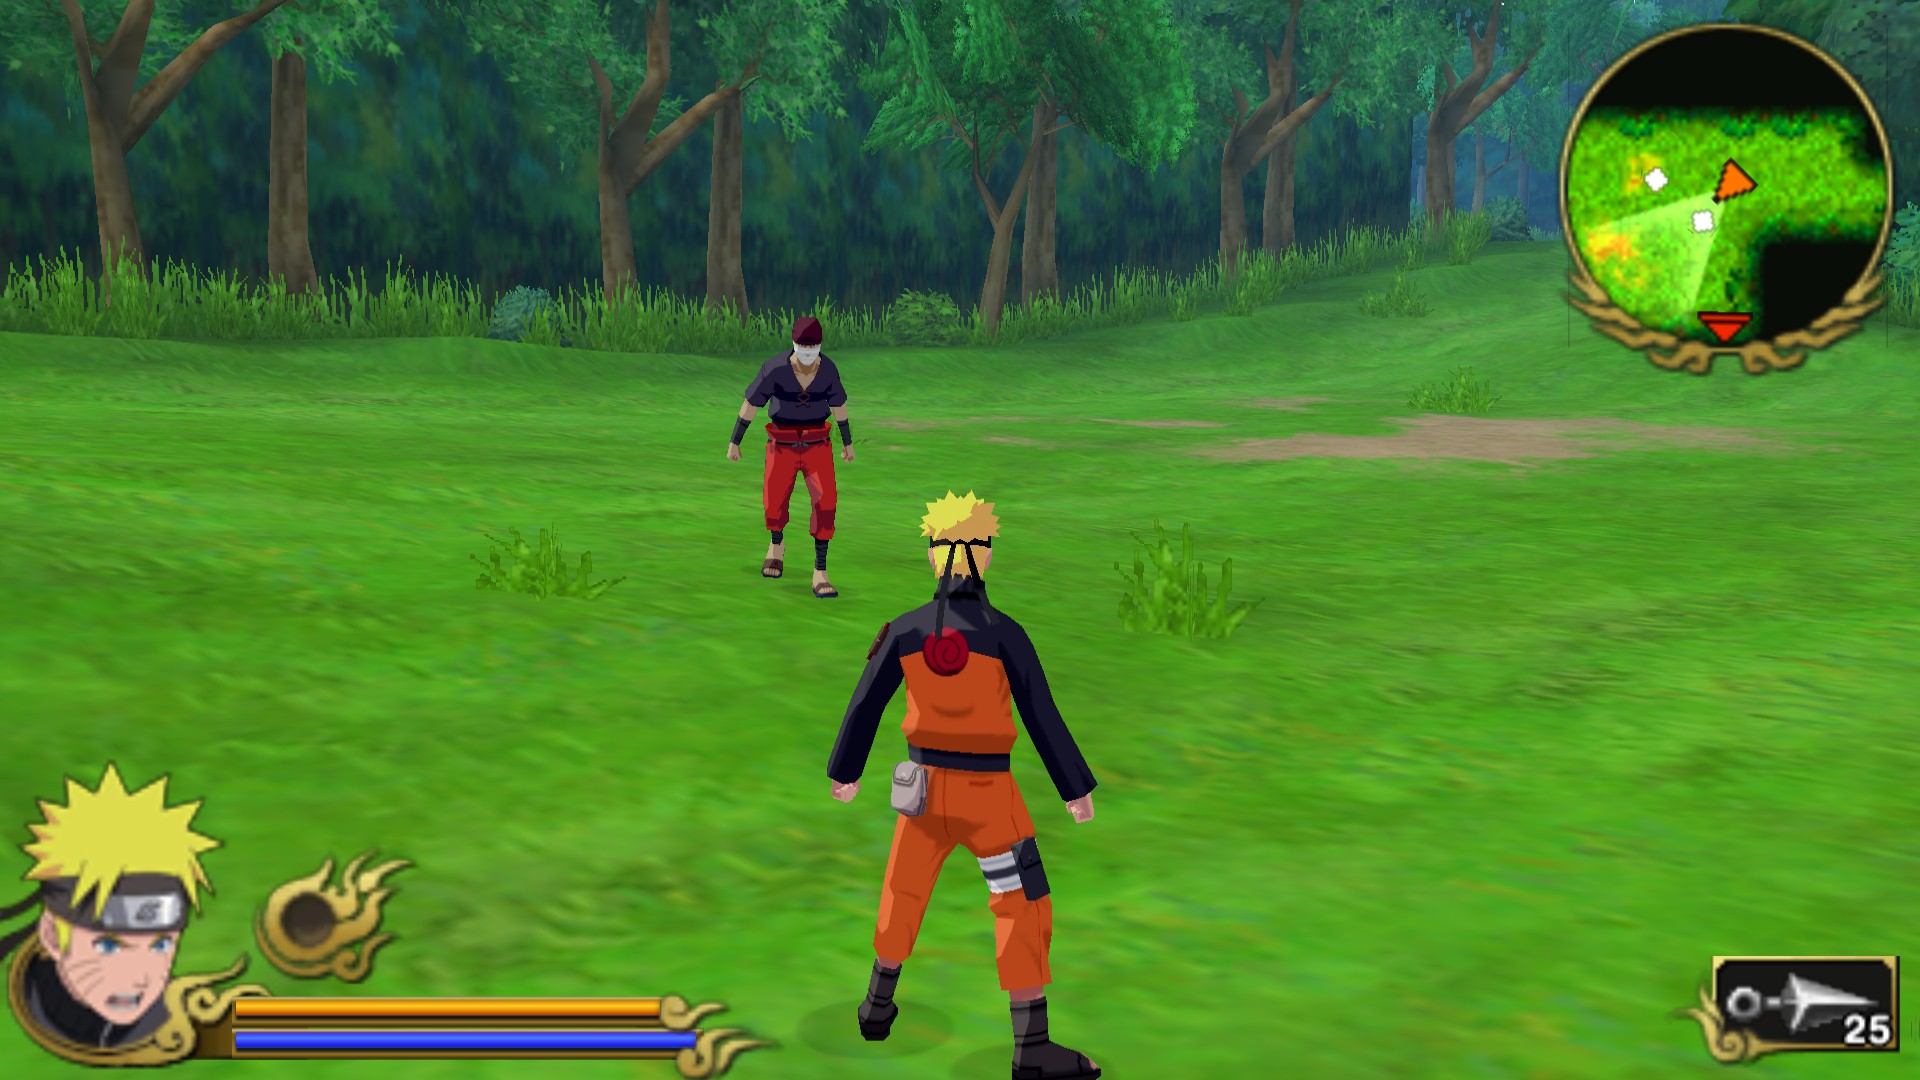 Download Game Naruto Ppsspp Pc